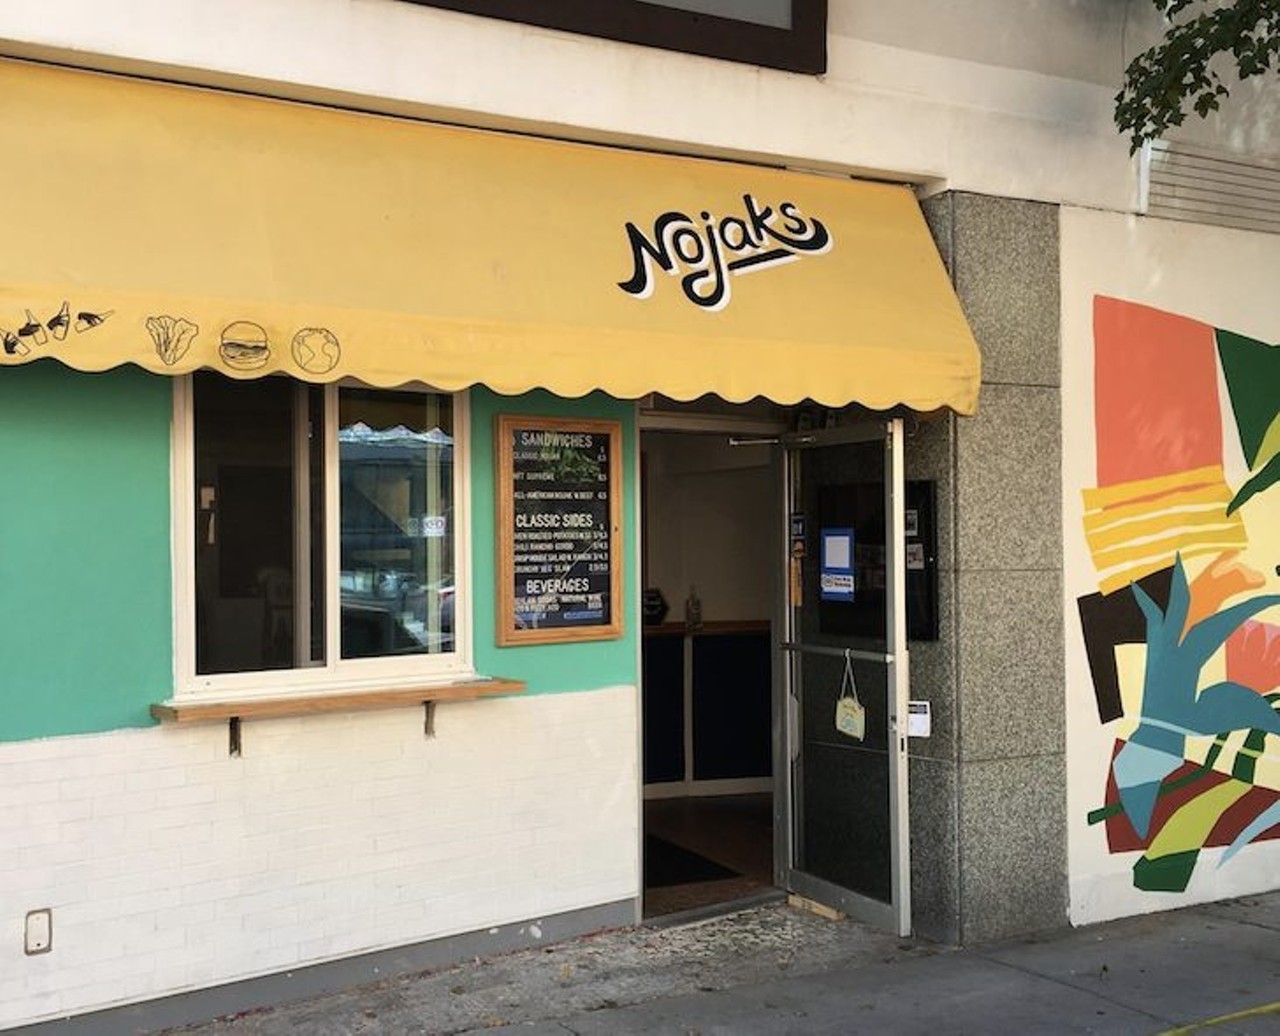 Nojaks
305 E Polk St., Tampa
Vegan burger joint Nojaks closed in February with hopes of relocation. The same owners, but different team, brought in Supernatural Food and Wine with &#147;mean sandwiches&#148; and Best of the Bay-winning vegan donuts.